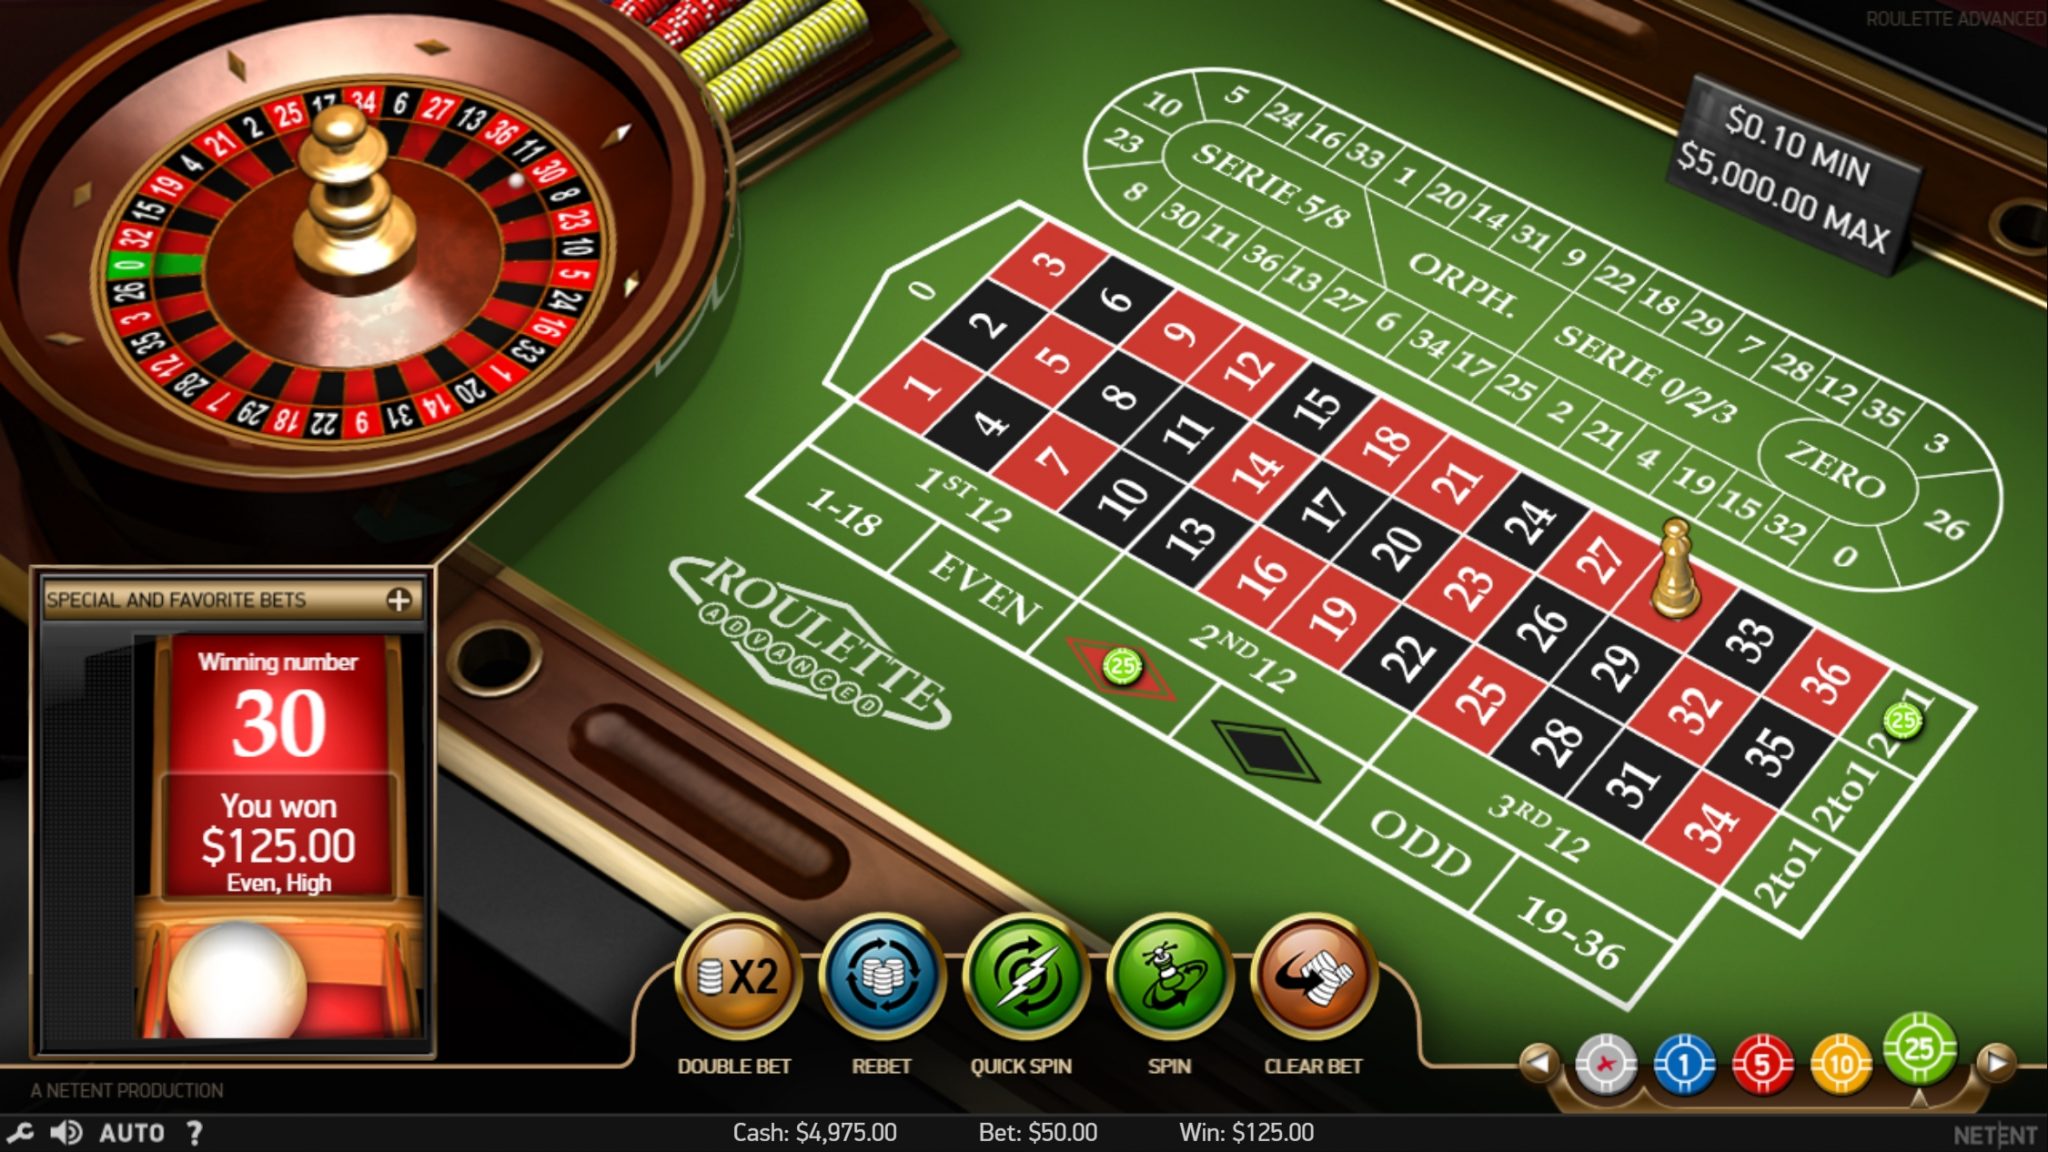 Play Roulette Online for Free or Real Money | The TwinSpires Edge